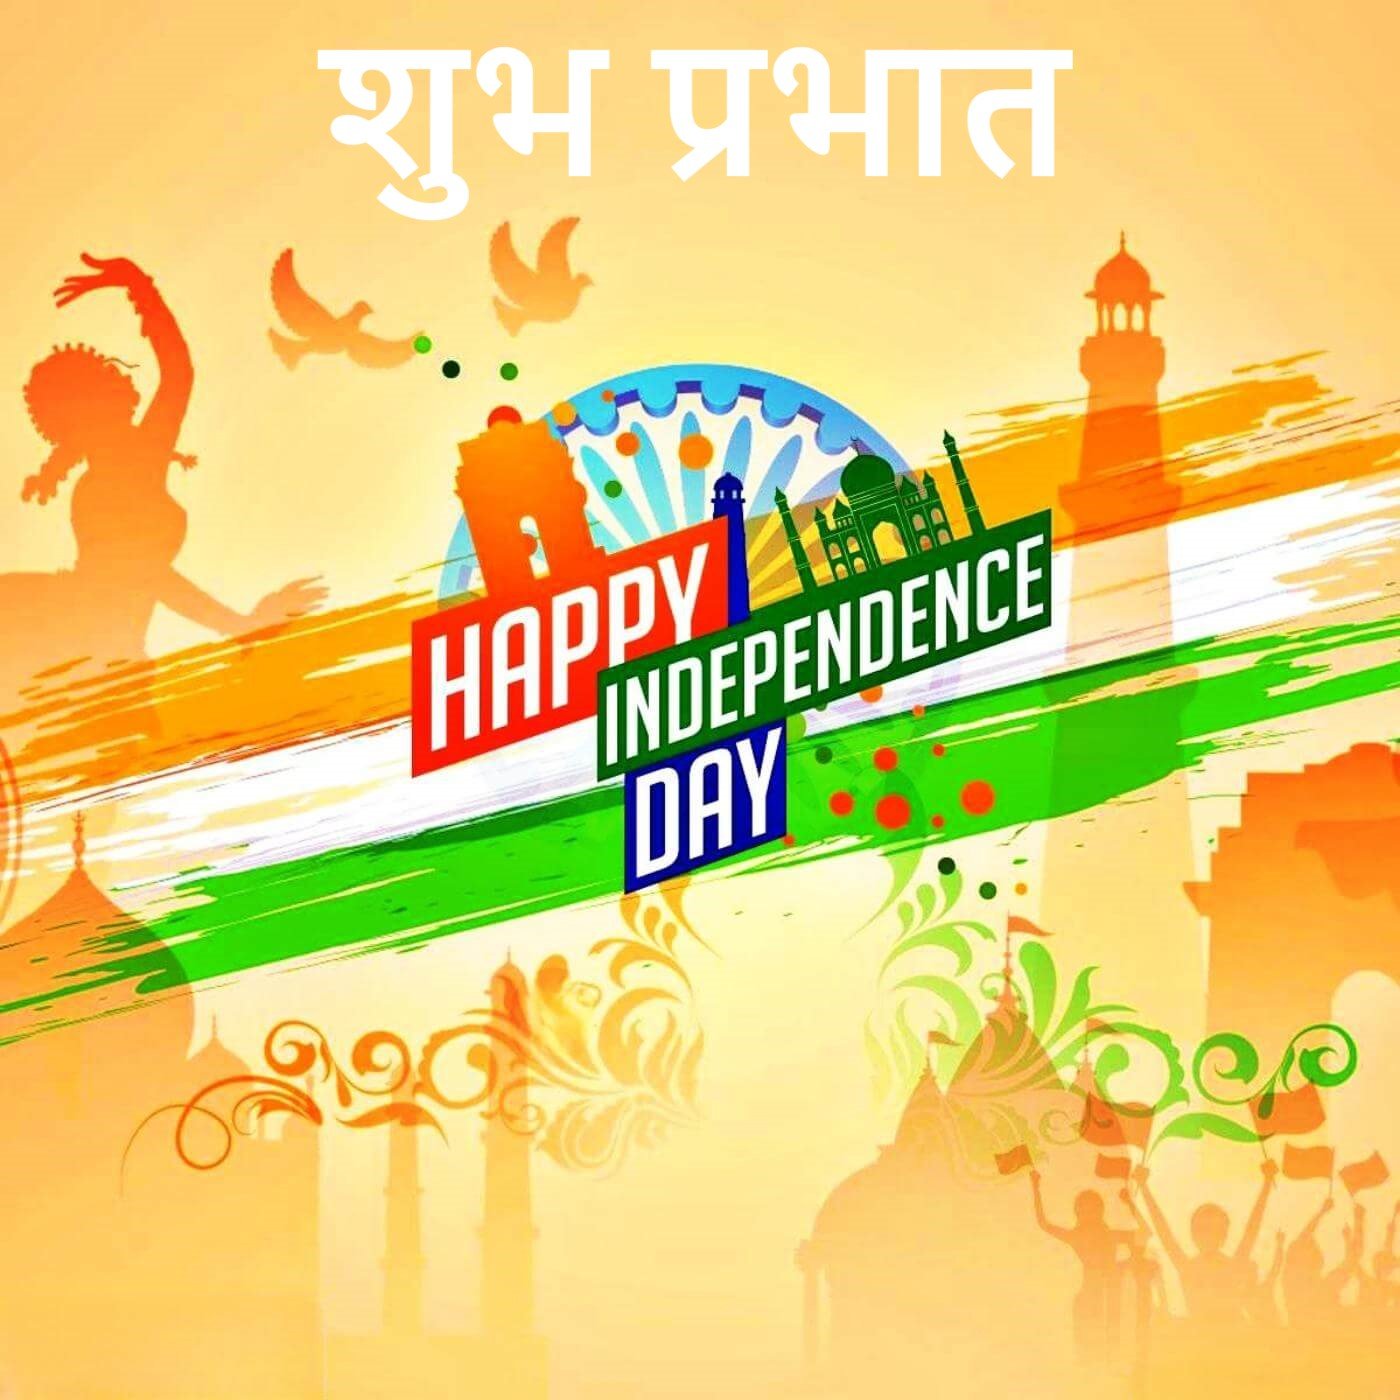 Good Morning Happy Independence Day Wishes Free Background